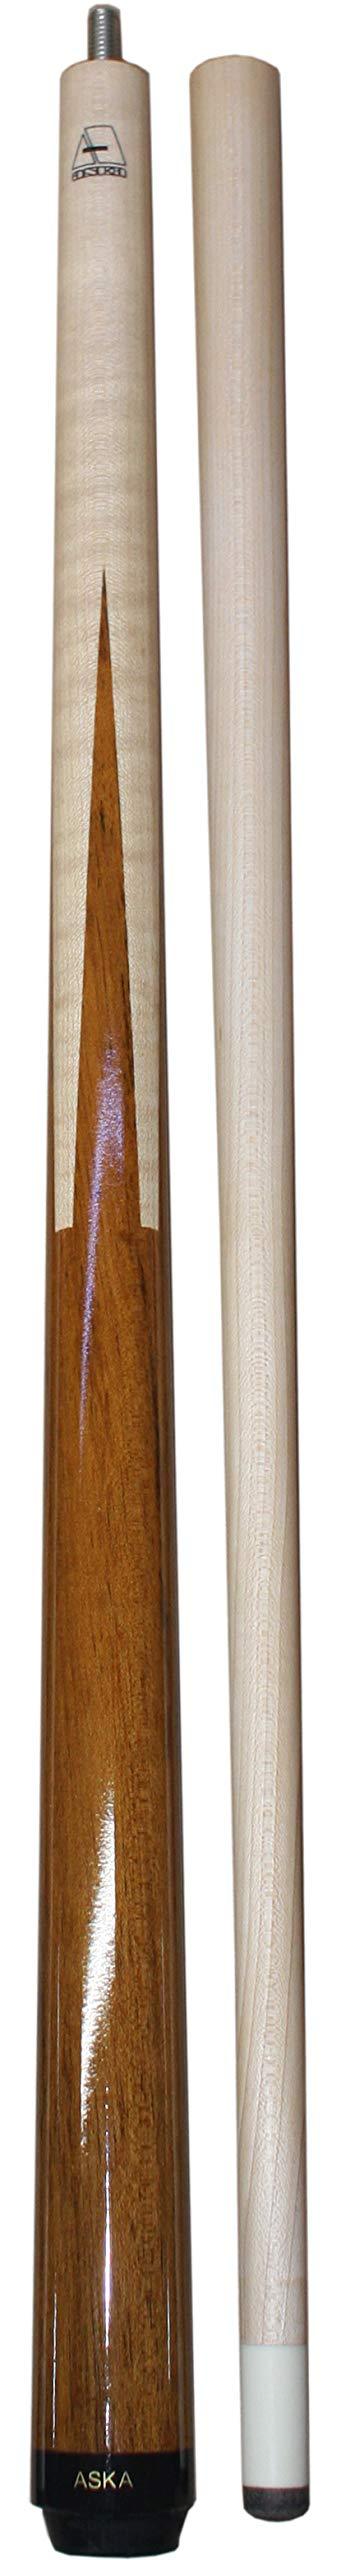 [AUSTRALIA] - ASKA Short Kids Cue Stick, Canadian Hard Rock Maple, 13mm Hard Tip Sneaky Pete 42-inches 